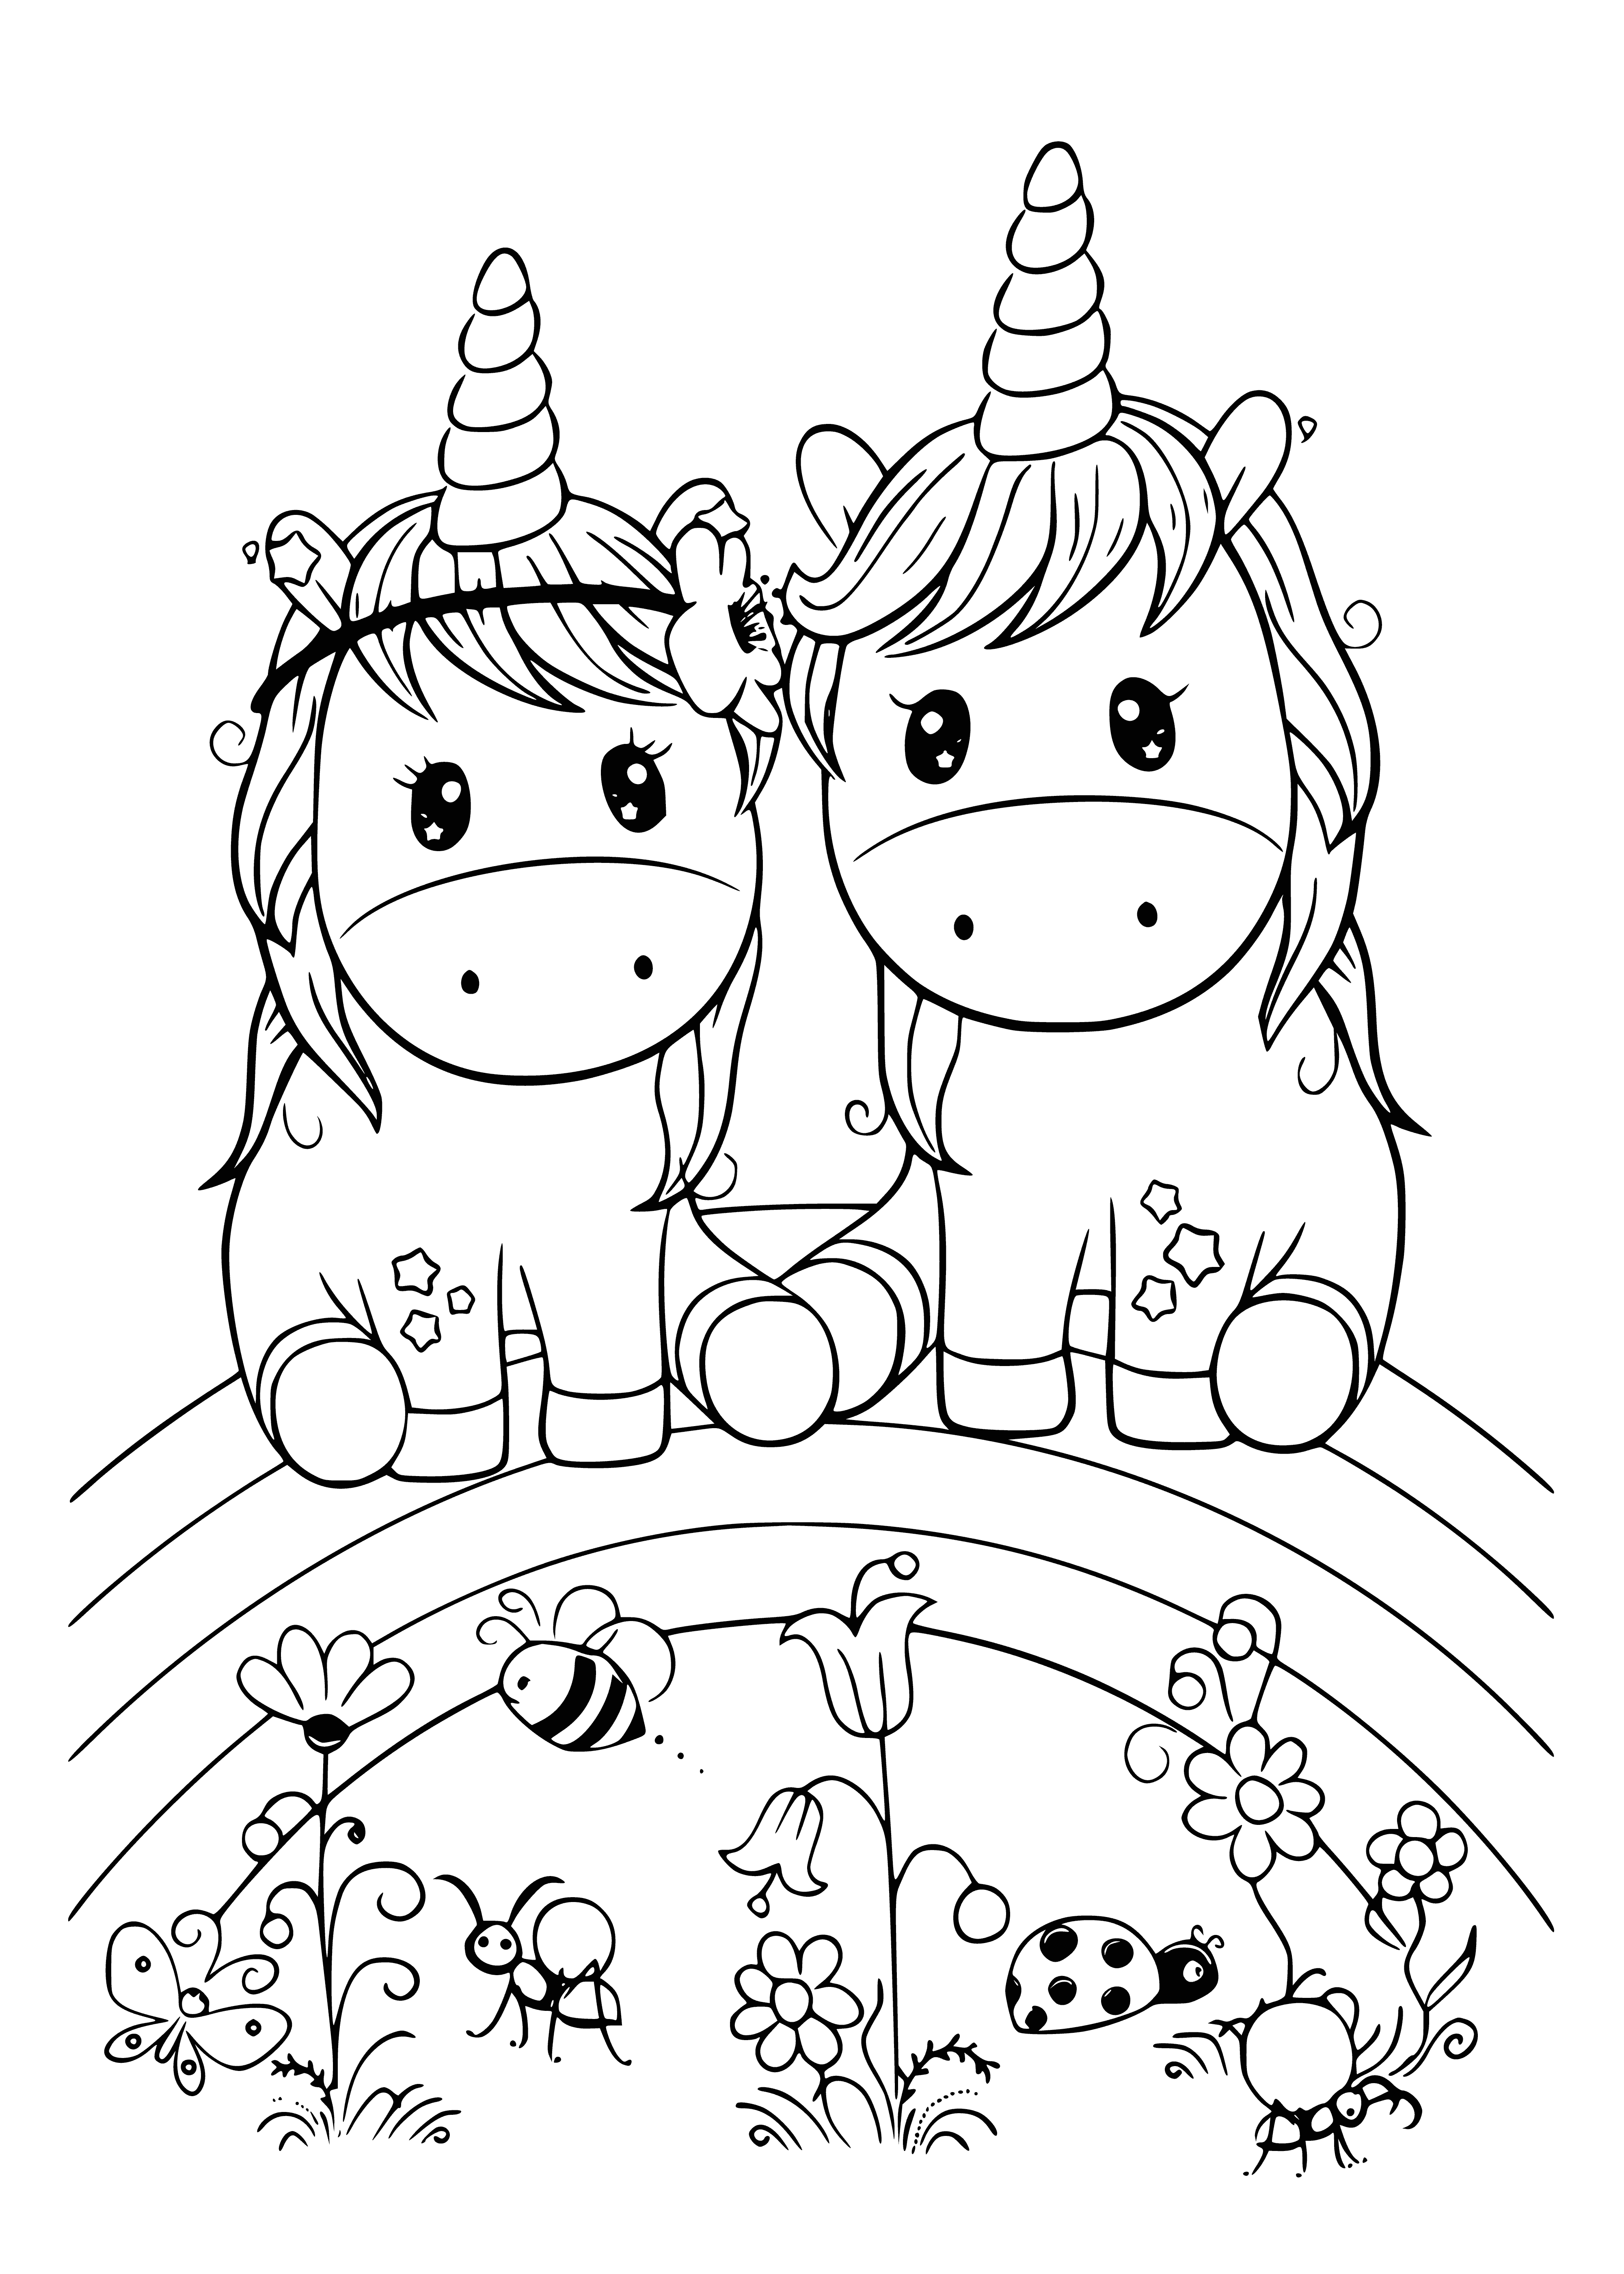 Unicorns on a rainbow coloring page